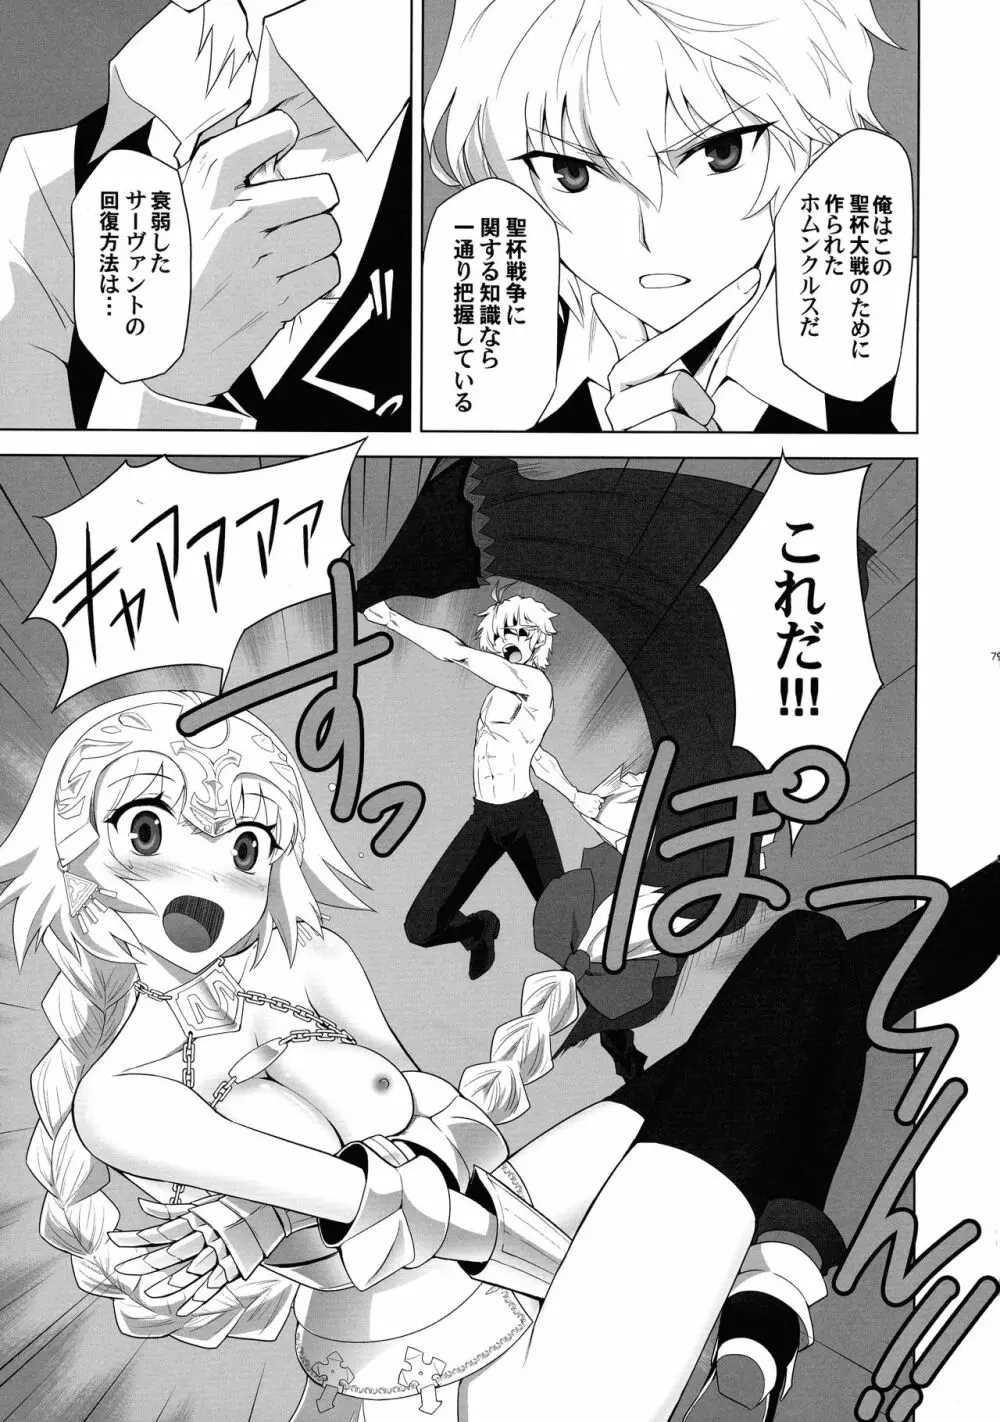 T*MOON COMPLEX R18 総集編 - page78